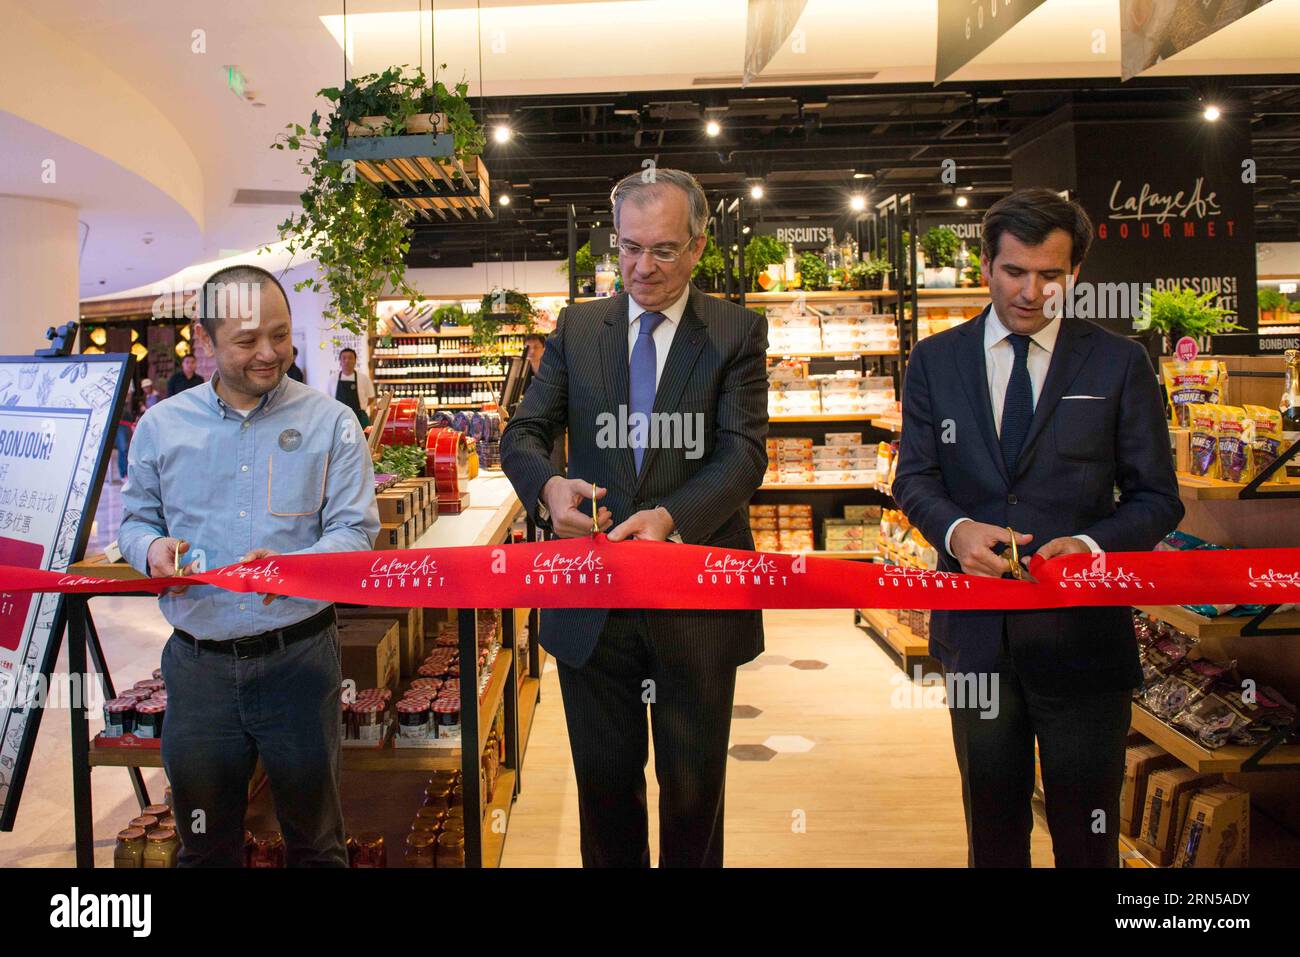 BEIJING, June 18, 2015 -- Maurice Gourdault-Montagne, French ambassador to China, attends the opening ceremony of a French food supermarket at Galleries Lafayette in Beijing, capital of China, June 18, 2015. A French food supermarket was opened at Galleries Lafayette of China on Friday, the largest of this kind in Beijing. ) (lfj) CHINA-BEIJING-LAFAYETTE-FRENCH FOOD SUPERMARKET (CN) QinxHaishi PUBLICATIONxNOTxINxCHN   Beijing June 18 2015 Maurice Gourdault Montagne French Ambassador to China Attends The Opening Ceremony of a French Food Supermarket AT Galleries Lafayette in Beijing Capital of Stock Photo